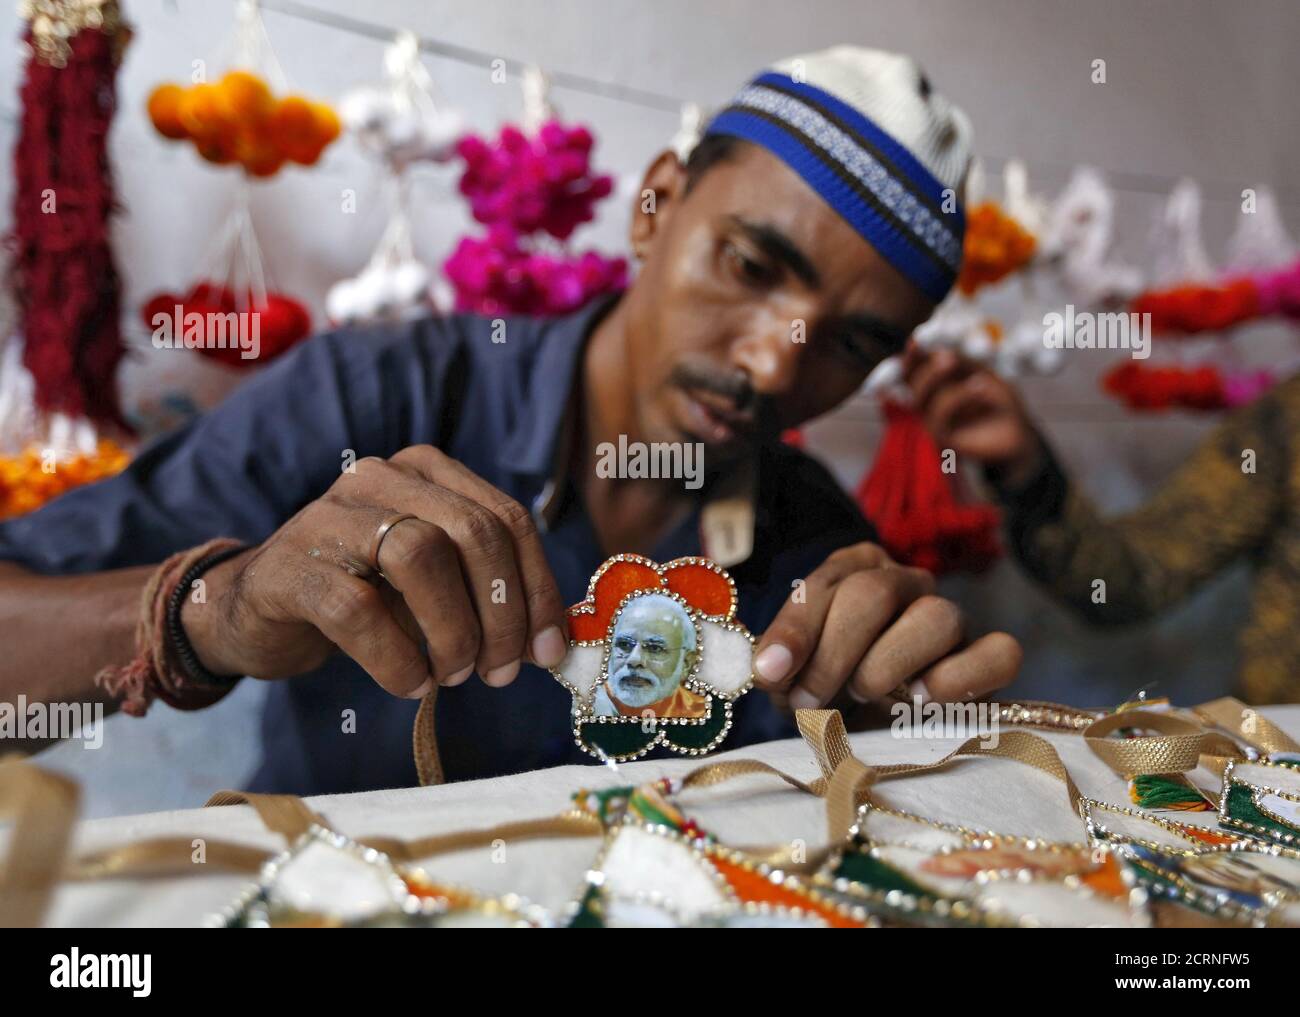 A Muslim artisan displays a 'rakhi' or traditional Indian sacred thread, featuring India's Prime Minister Narendra Modi after giving it the finishing touches inside a workshop in Ahmedabad August 17, 2015. Rakhi is also the name of a Hindu festival, also known as Raksha Bandhan, during which a sister ties one or more of the sacred threads onto her brother's wrist to ask him for her protection. The festival will be celebrated across the country on August 29 this year. REUTERS/Amit Dave Stock Photo